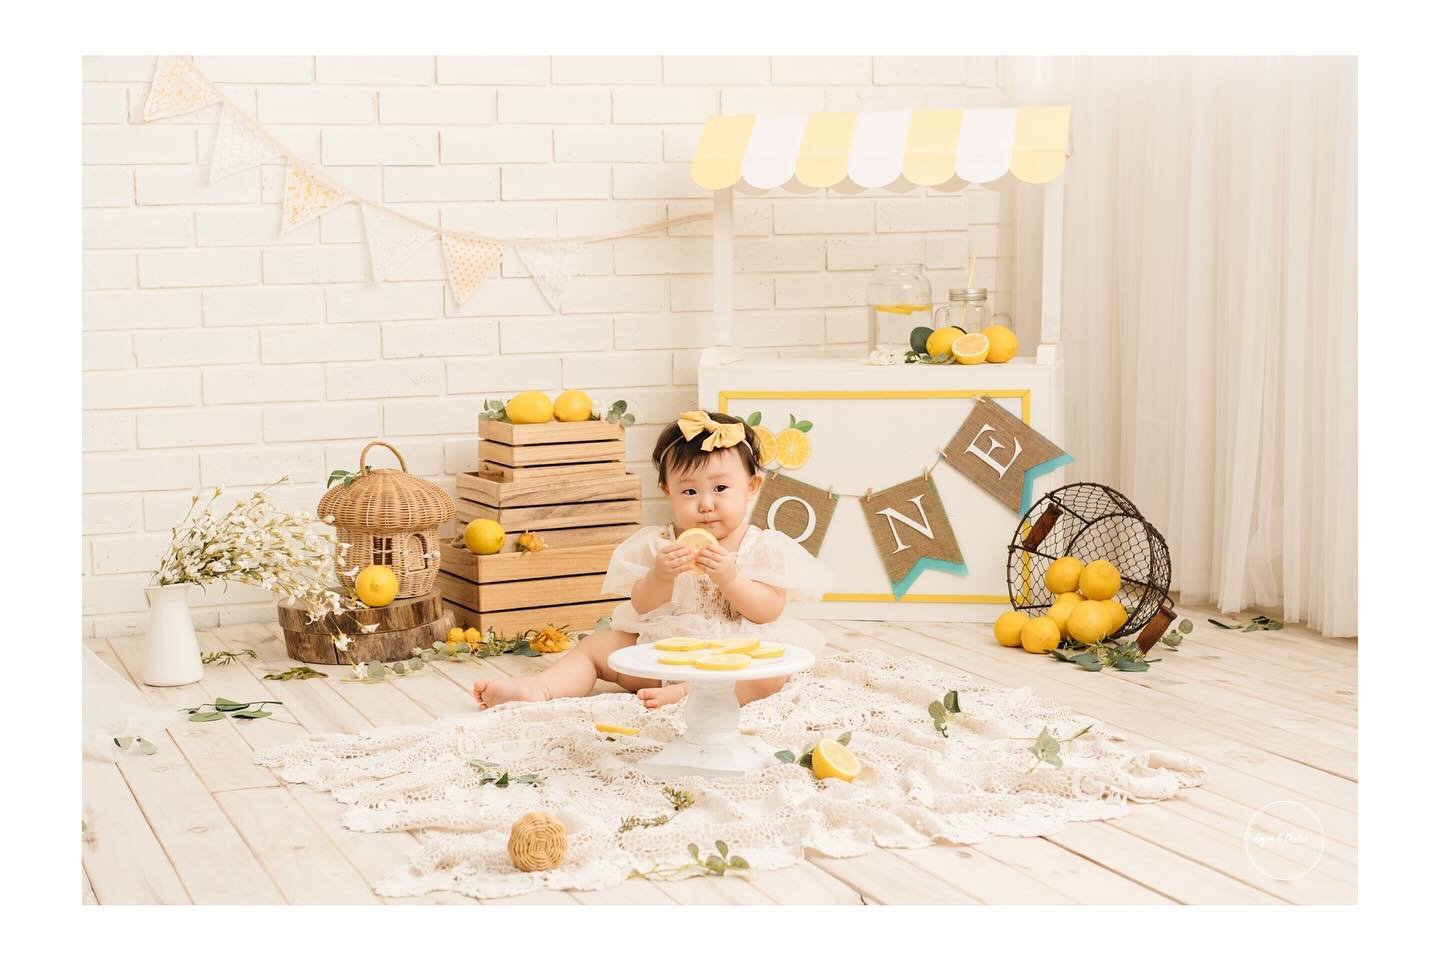 When life gives you lemons, you capture every adorable moment! 🍋✨ 
This sweet baby&rsquo;s lemony adventure was pure sunshine! ☀️

Swipe to see photos of this beautiful family from Japan

Don&rsquo;t miss out on these precious memories! DM us to boo